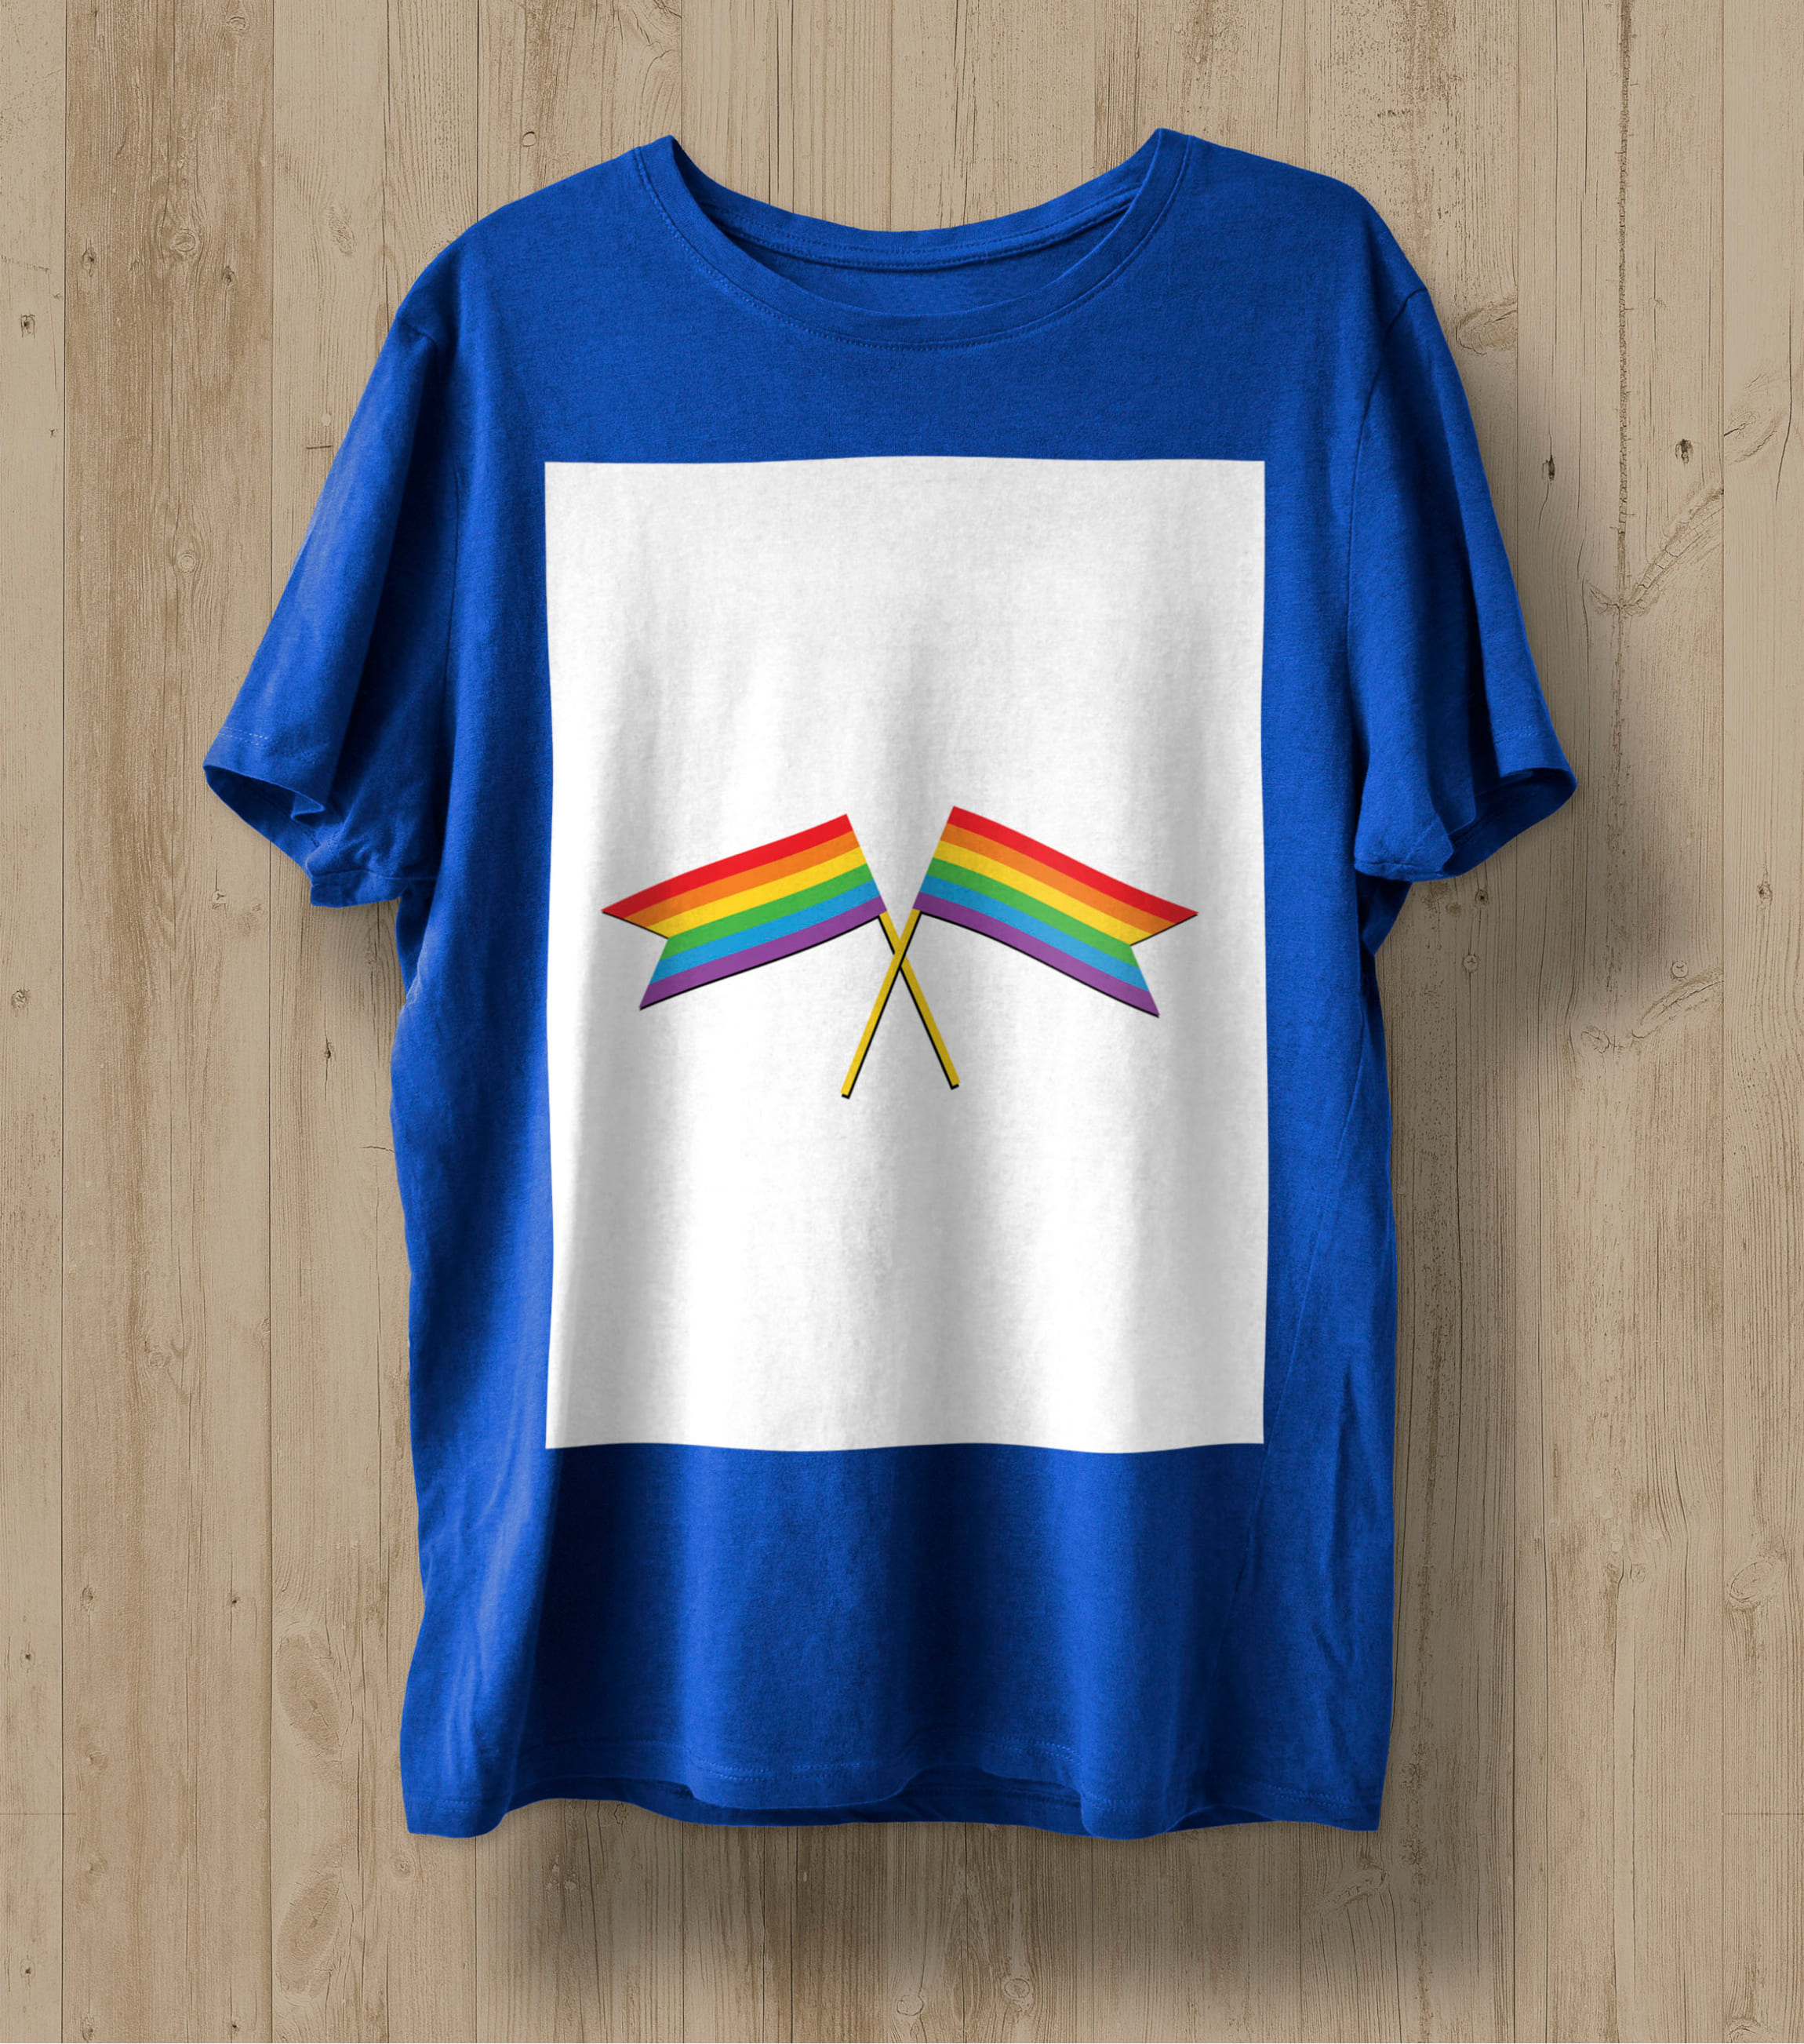 Blue T-shirt with two LGBT flags in a white rectangle.